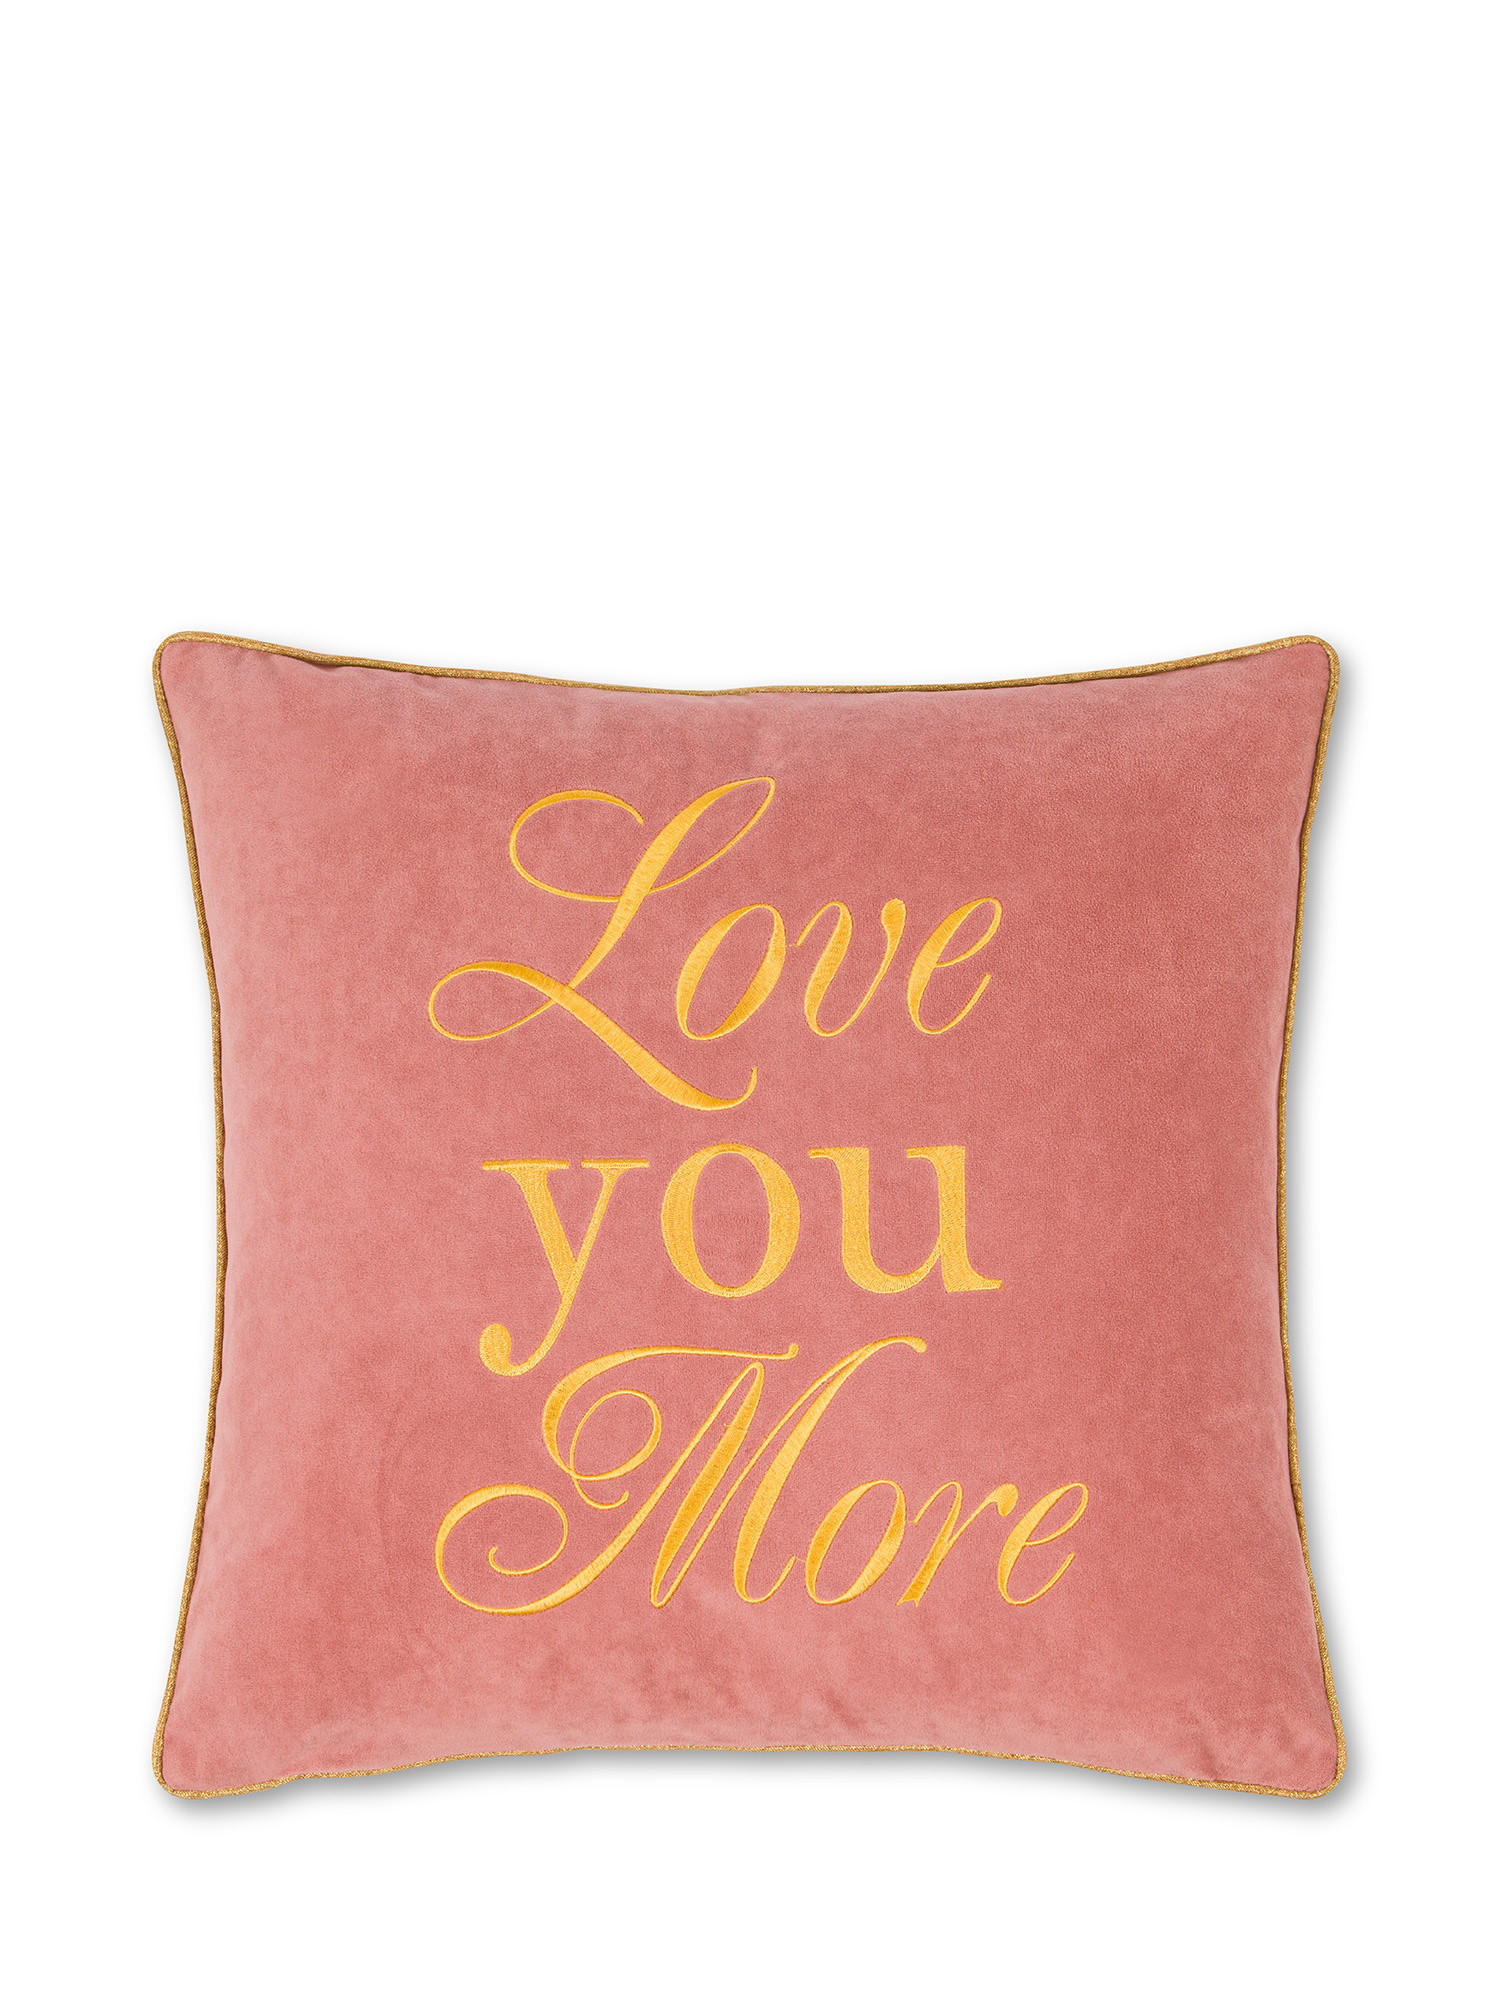 Velvet cushion embroidered with piping 45X45cm, Pink, large image number 0